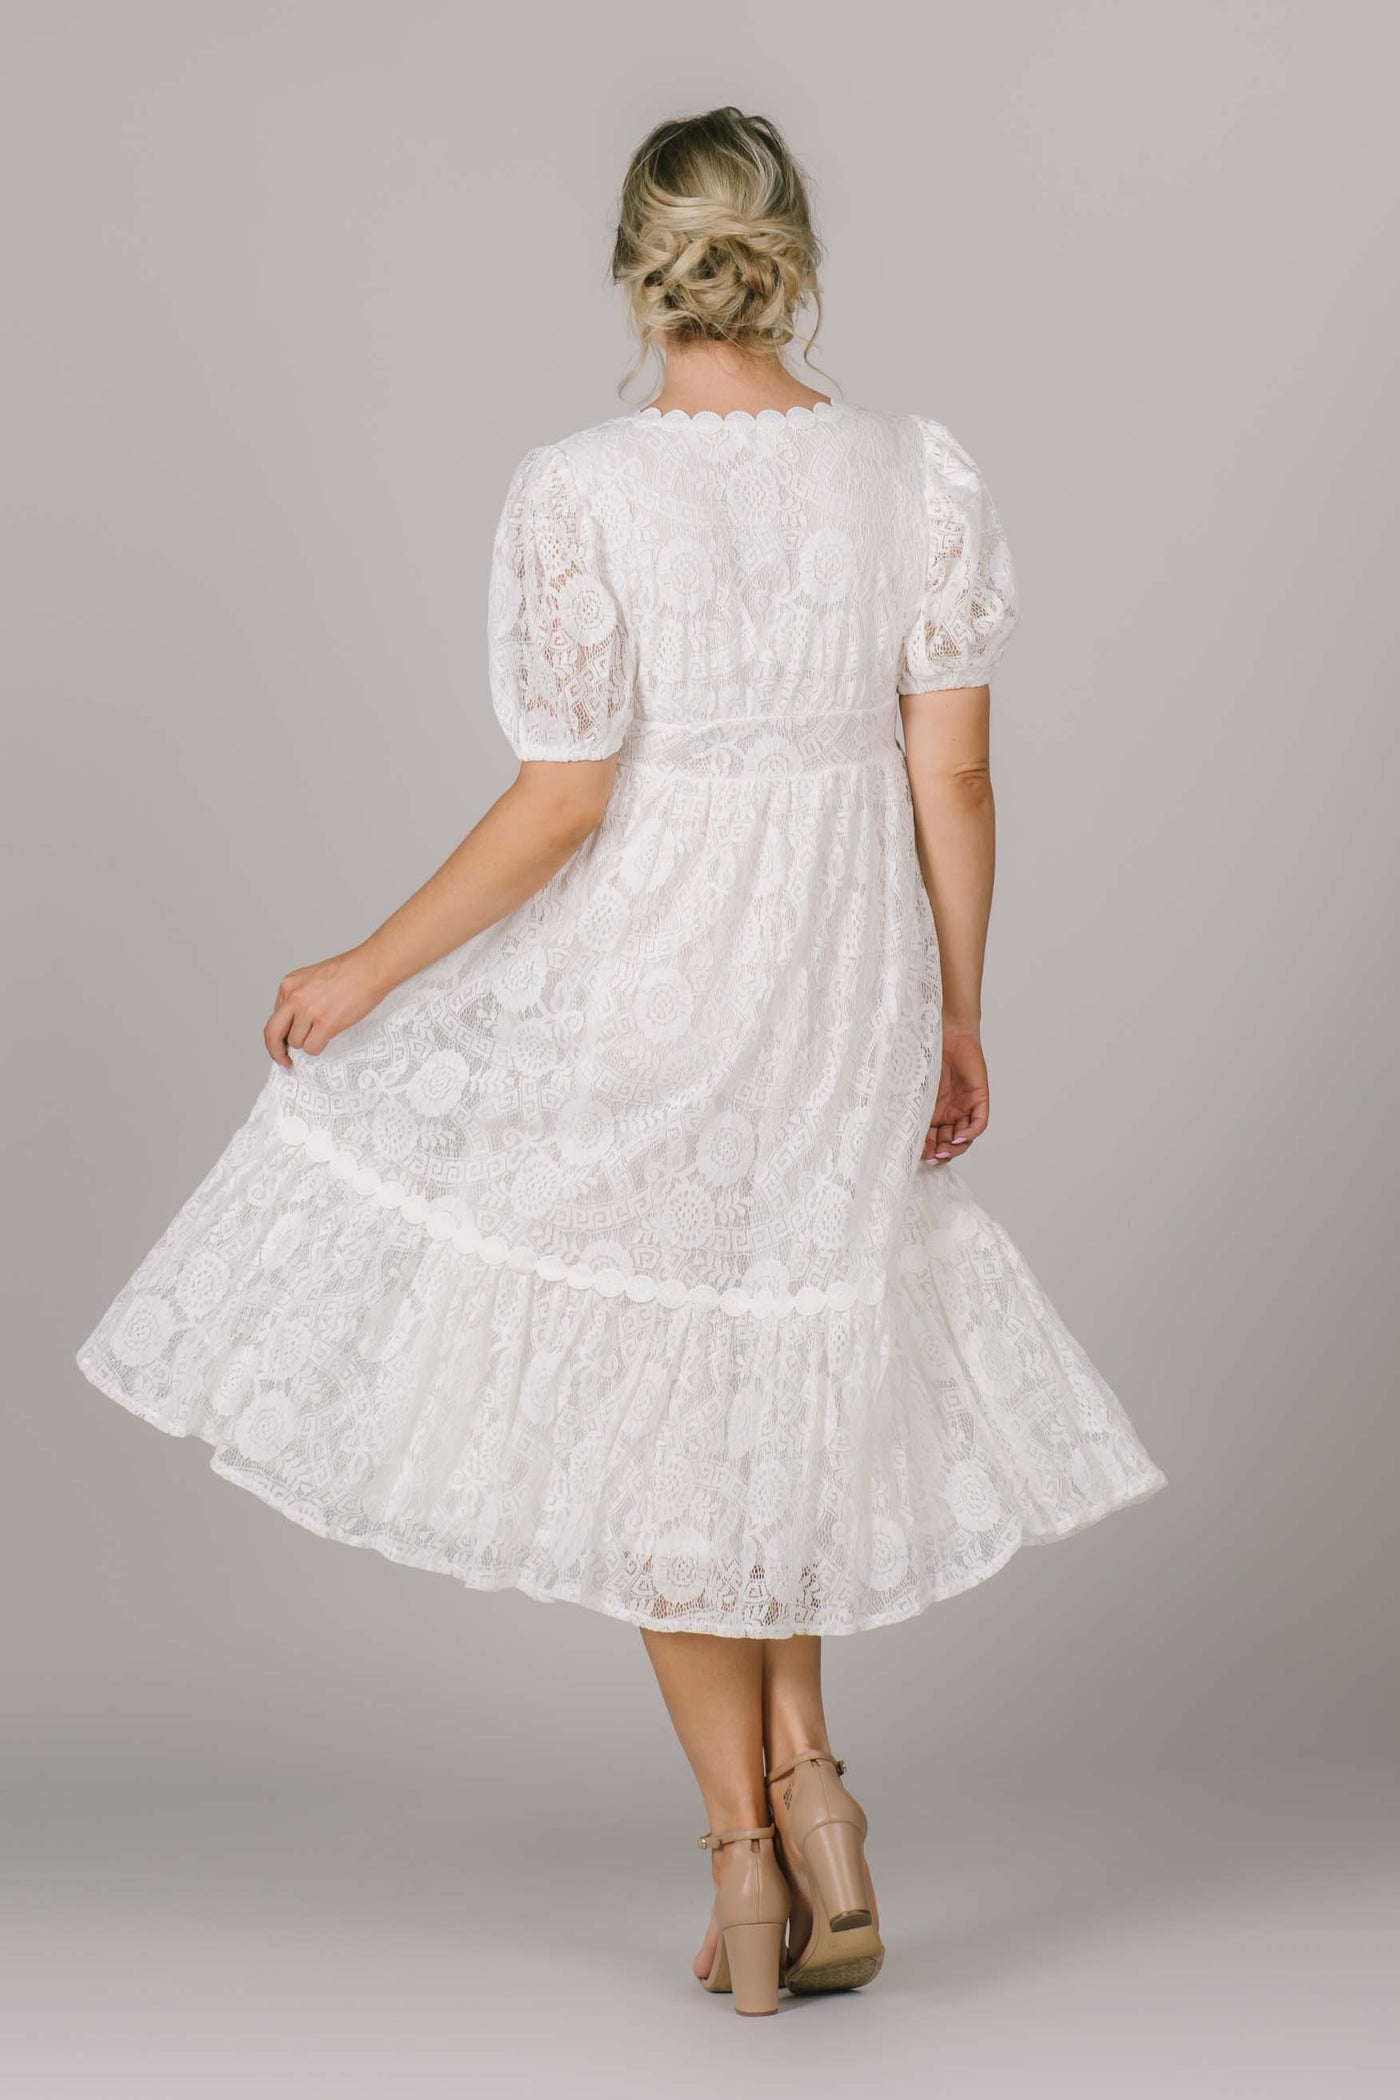 Perfect modest dress with lace detail all over, and gorgeous sheer puff sleeves. 